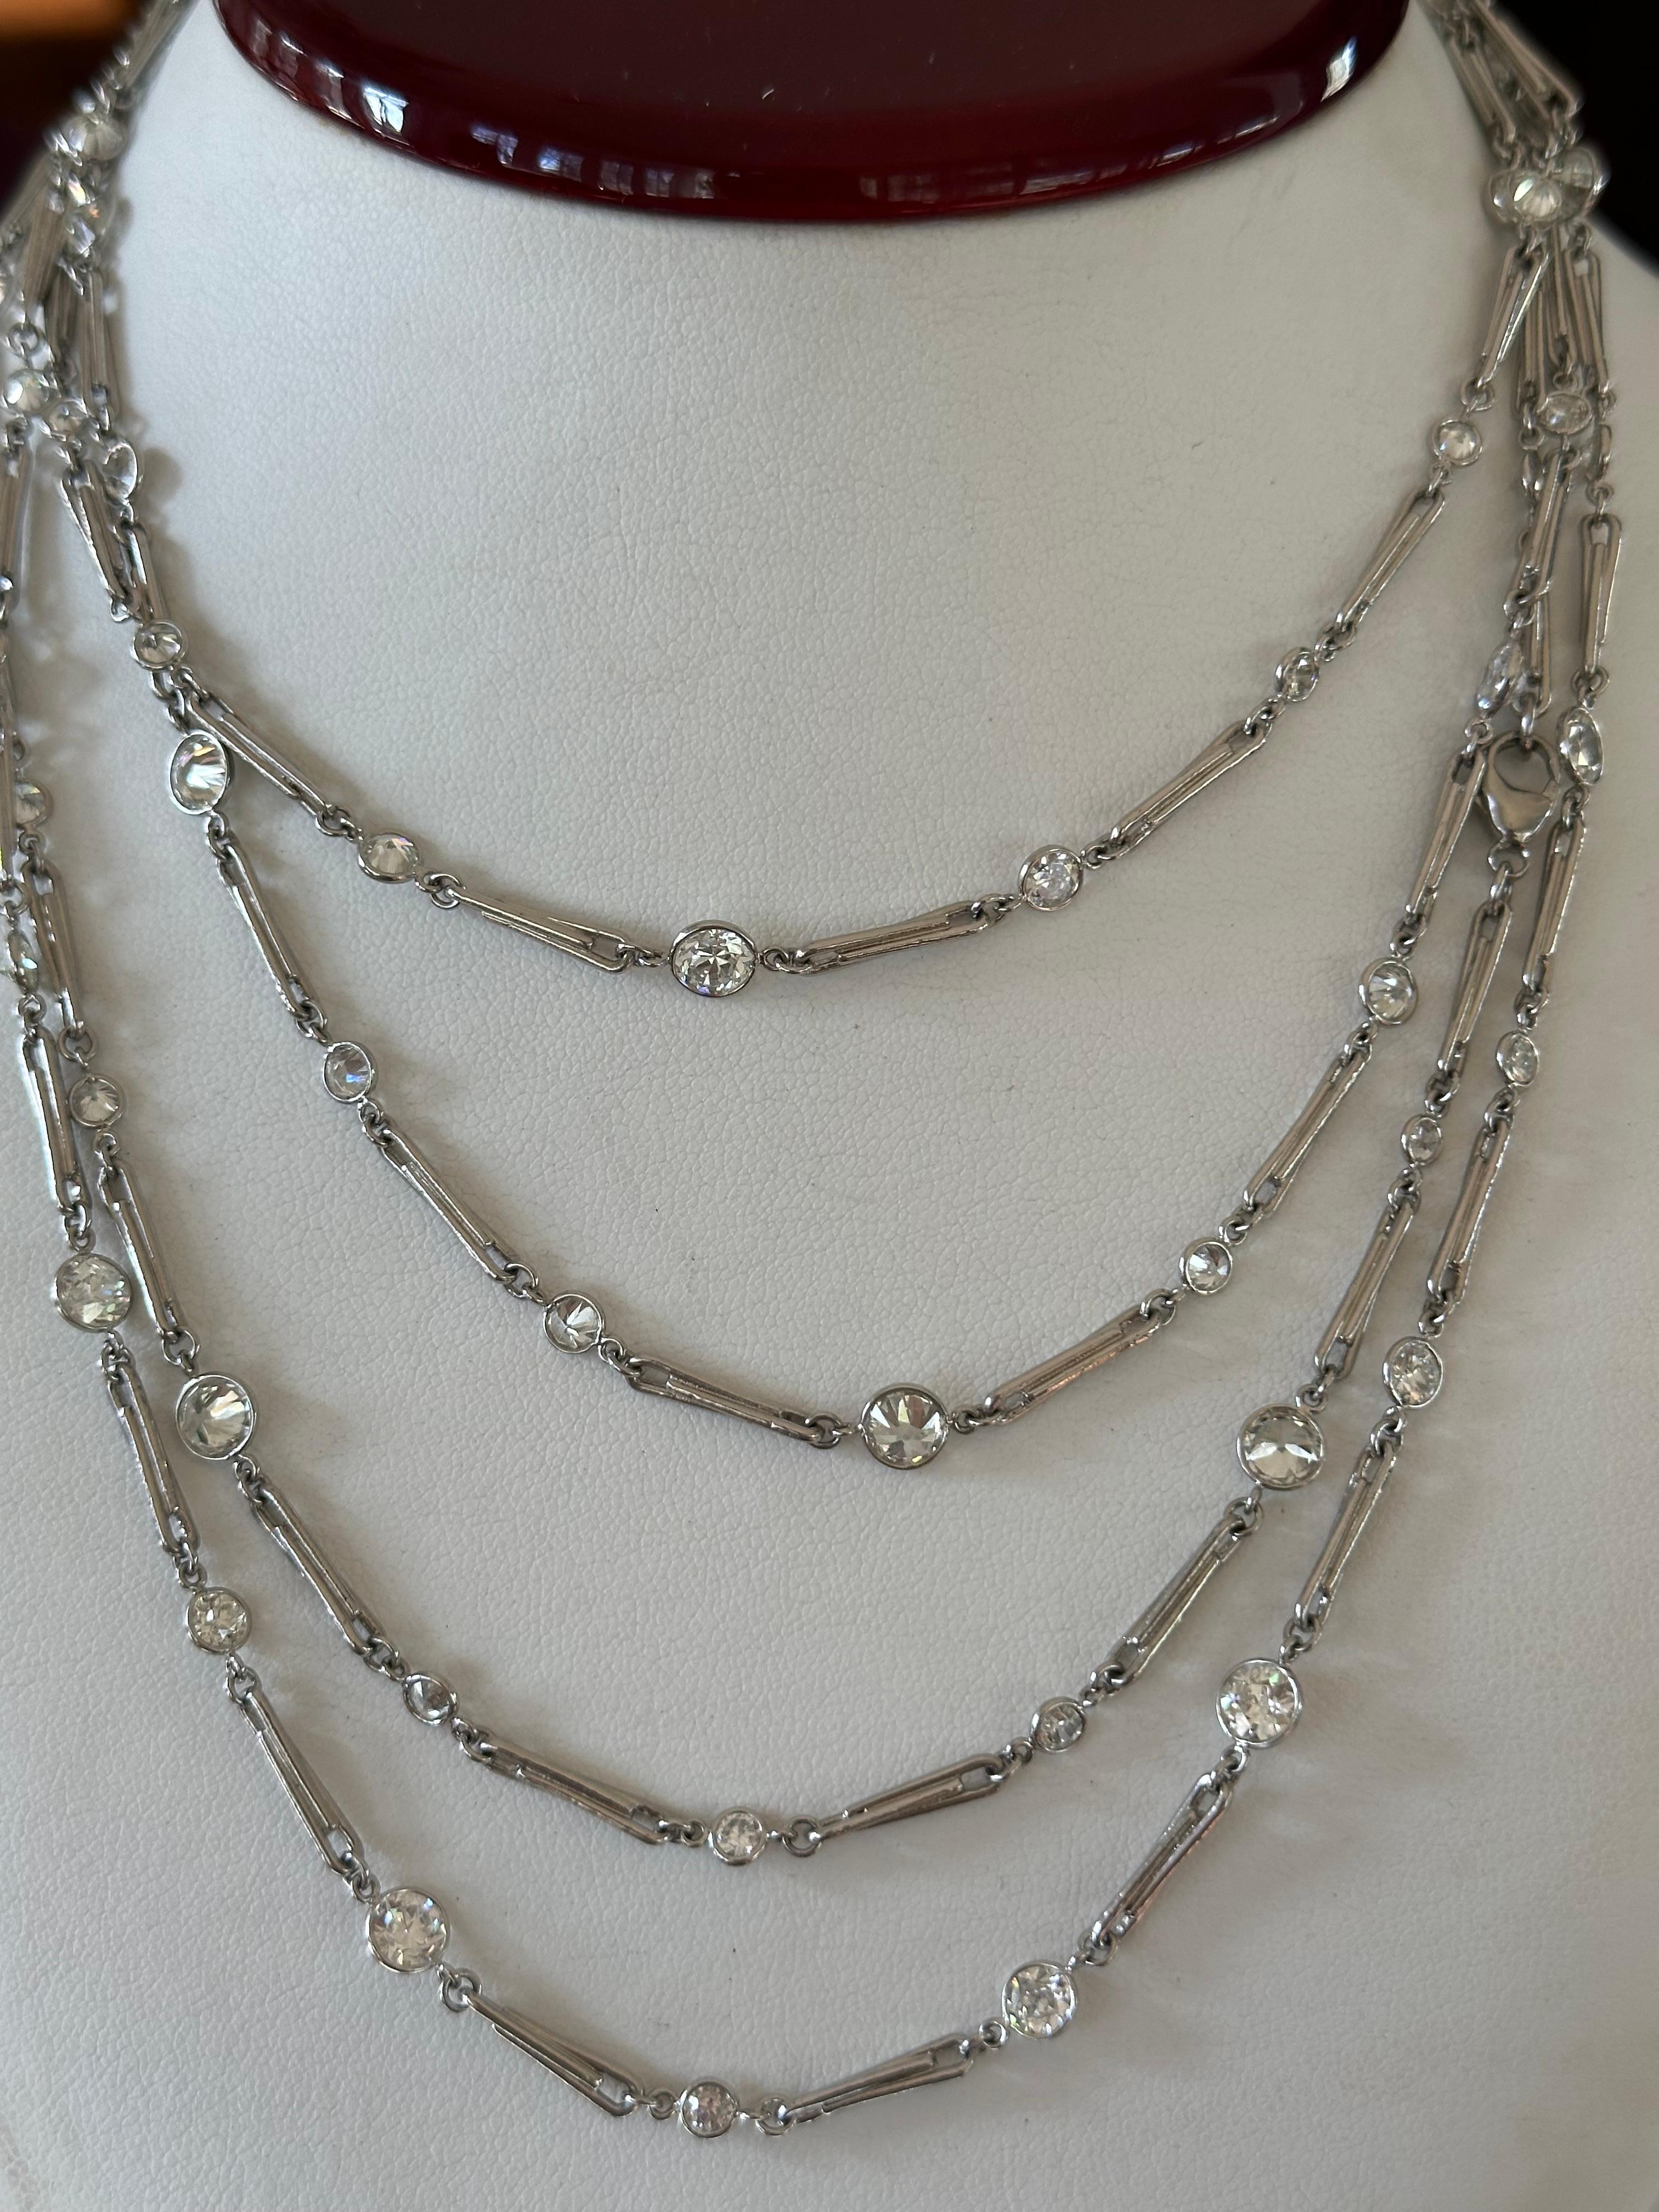 Measuring an impressive 70 inches long, this antique style diamonds-by-the-yard necklace features seventy-six Old European-cut diamonds in varying sizes, GH color, VS clarity, weighing together 20.03 carats. Handcrafted in platinum.  As versatile as